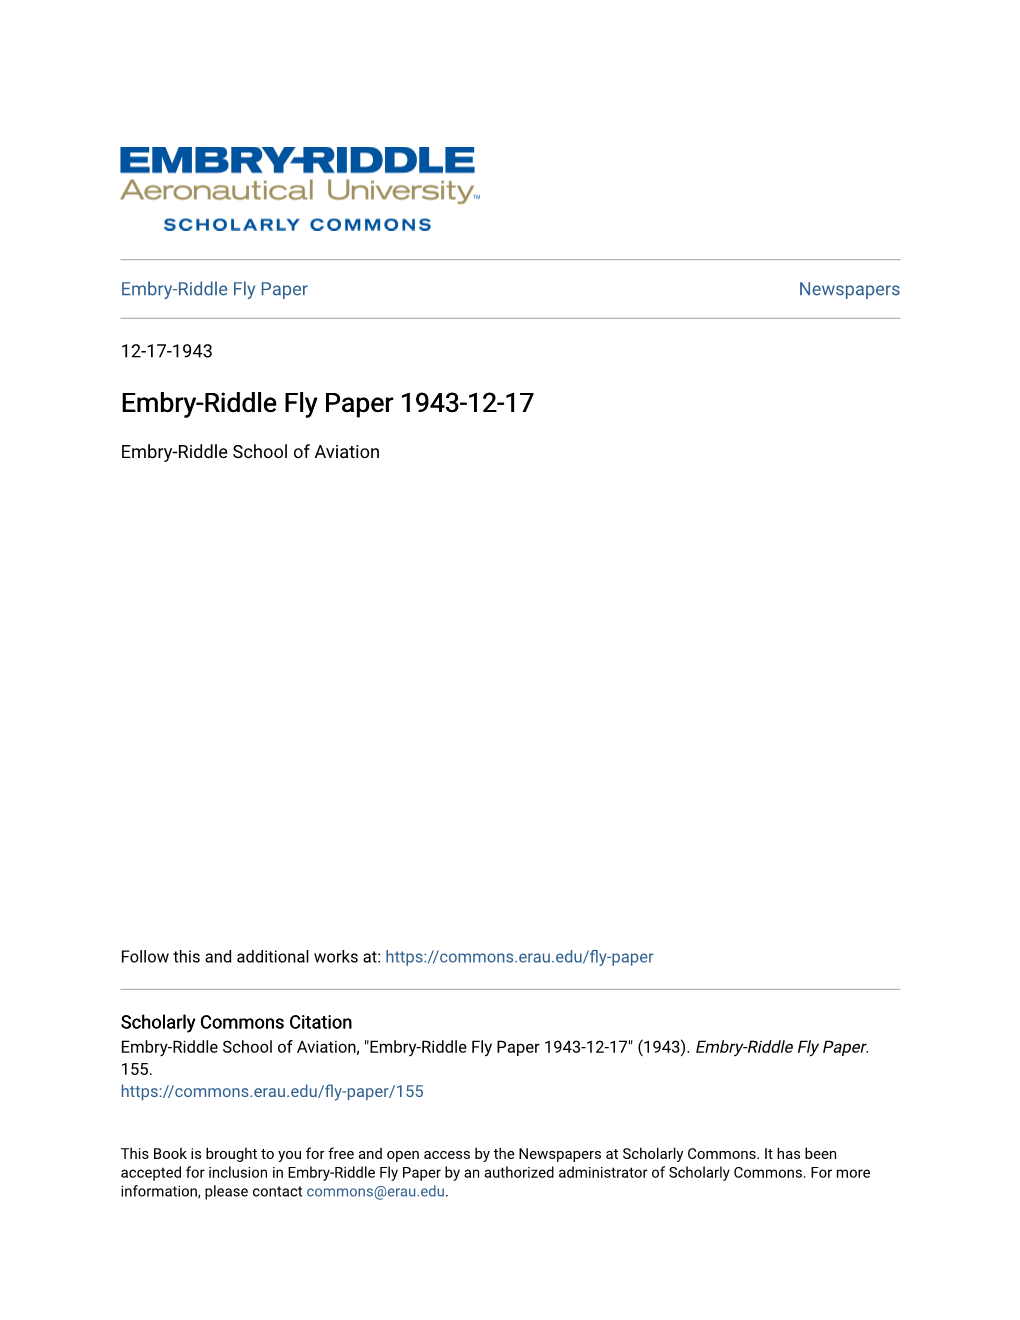 Embry-Riddle Fly Paper 1943-12-17